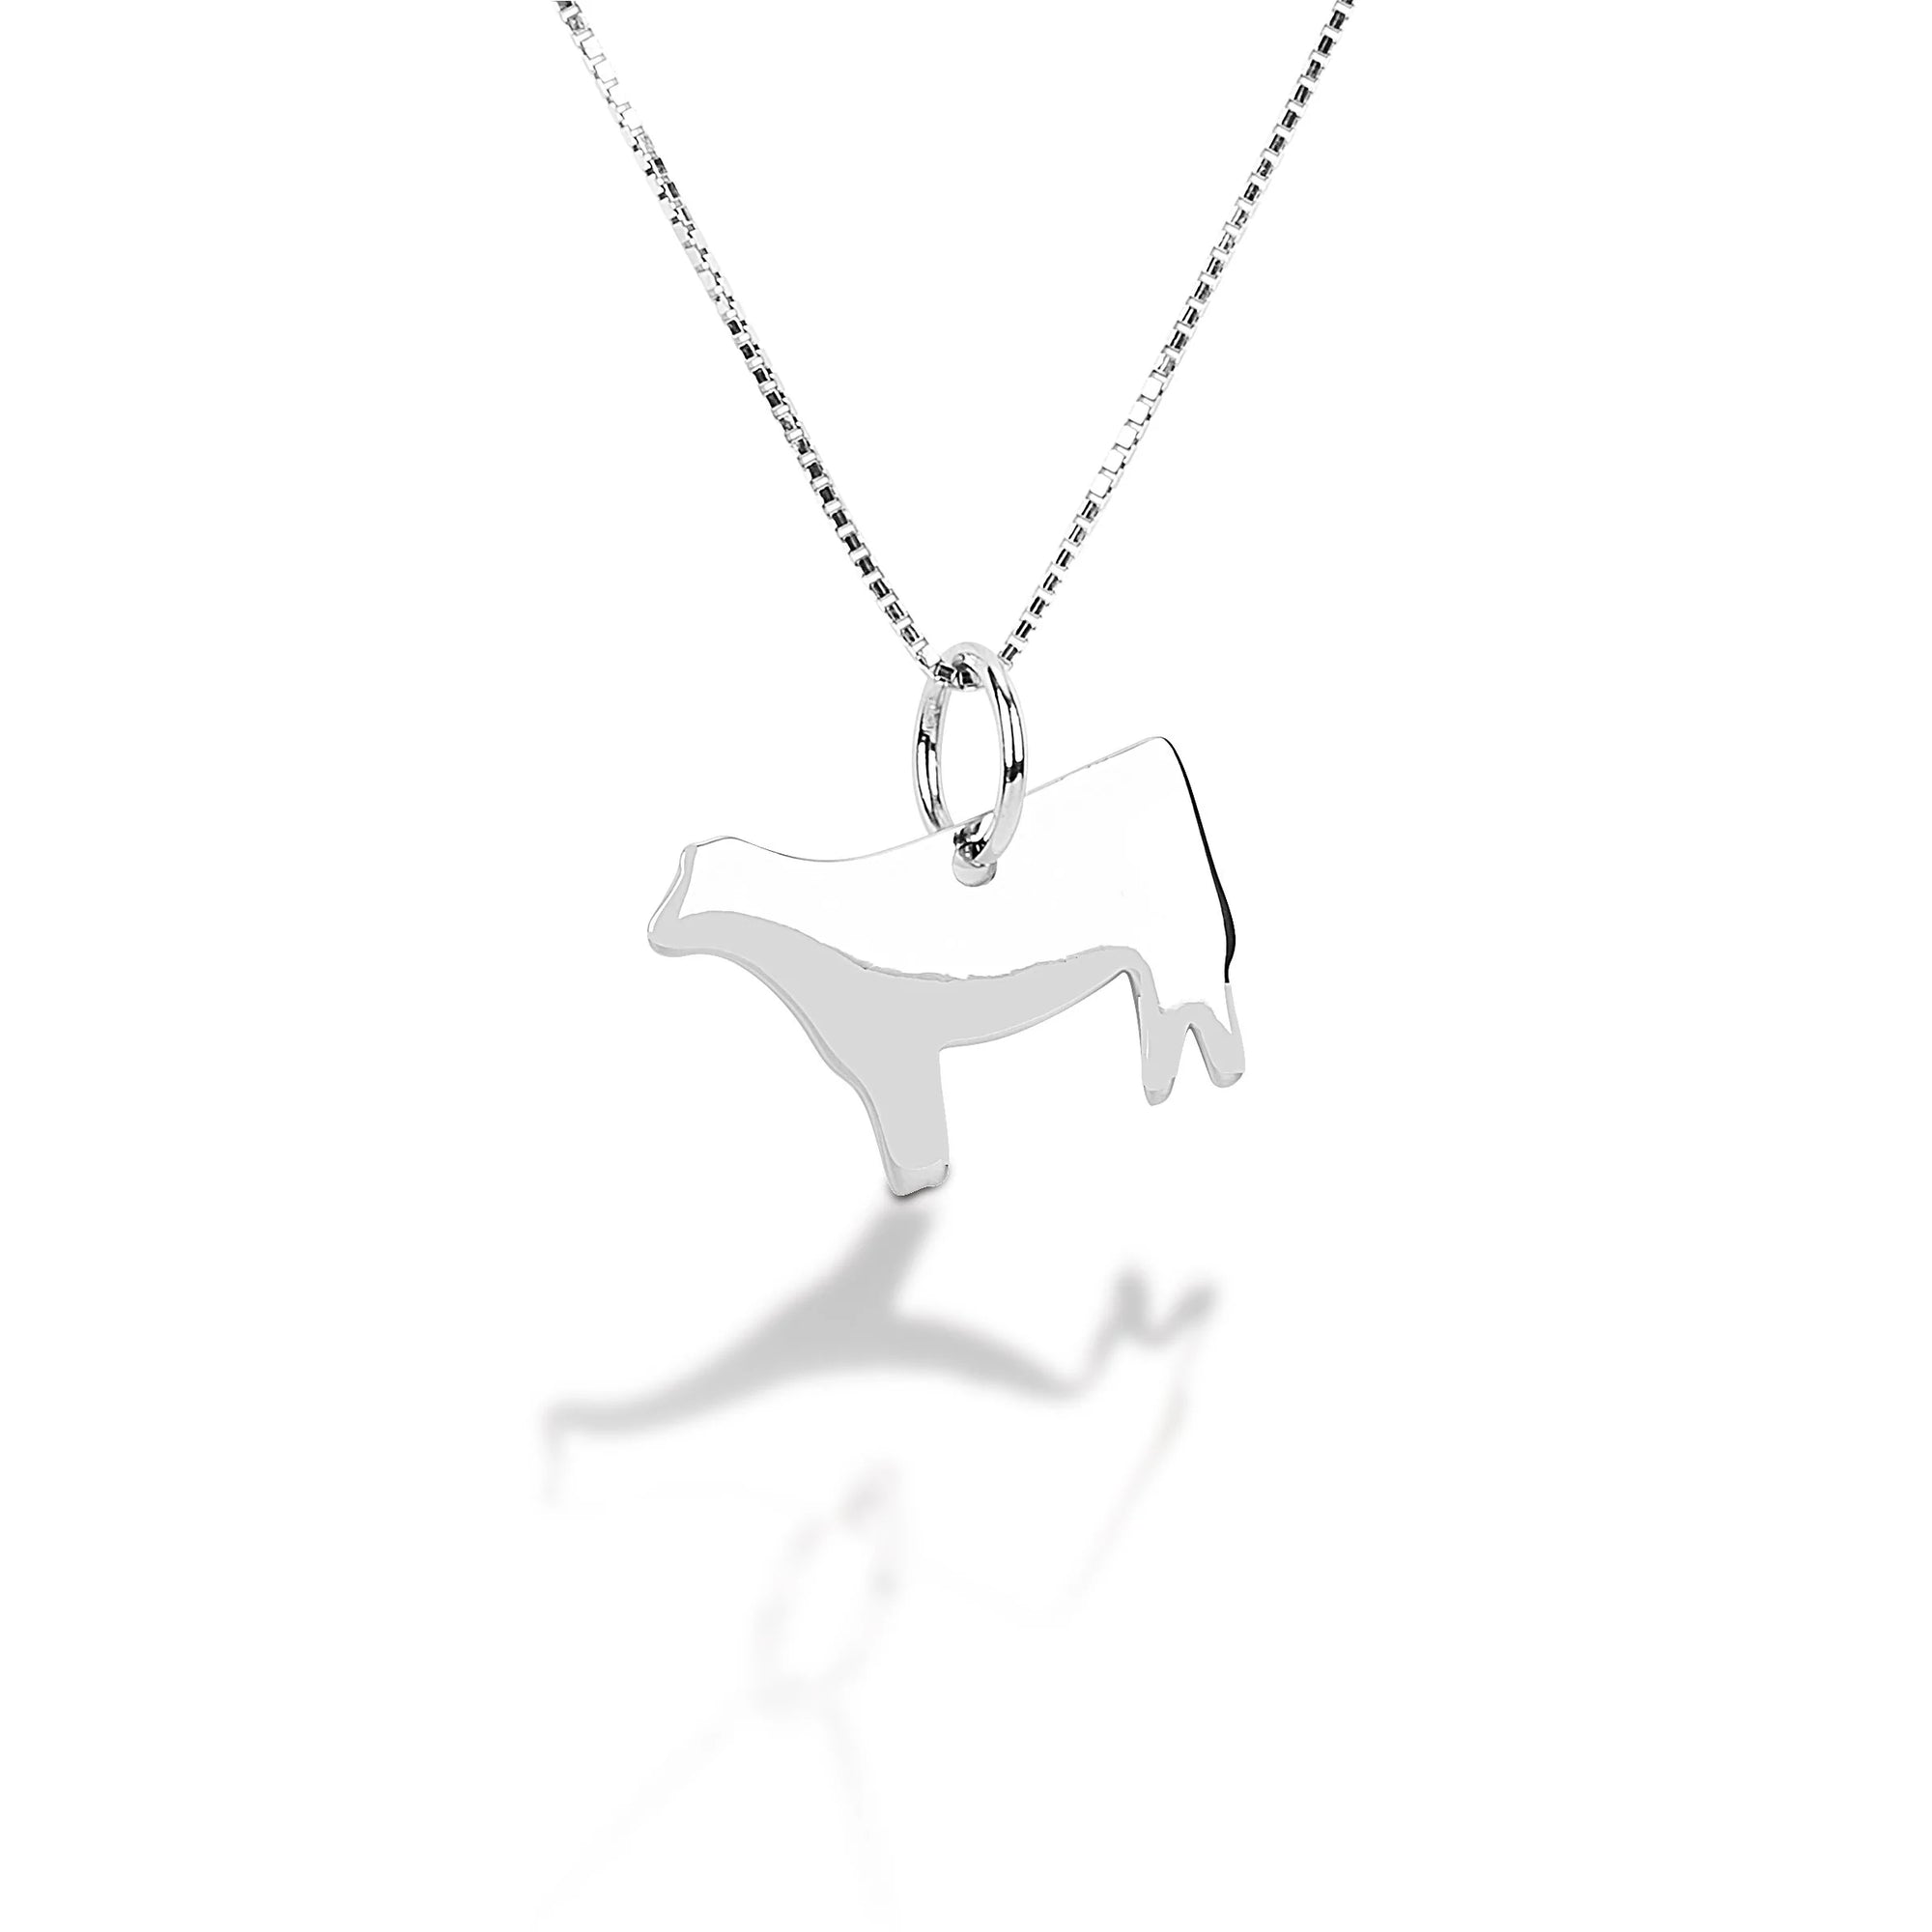 This beautiful pendant necklace captures the spirit of the barnyard. Wearing it will make you proud of your farm-raised heritage and you will definitely stand out in a crowd! This pendant is perfect for any occasion, from line dancing competitions to Rodeo Court appearances.    Features      Heifer Silhouette Pendant      Adjustable 16-18" chain     Sterling Silver     Measures 16 mm x 19 mm